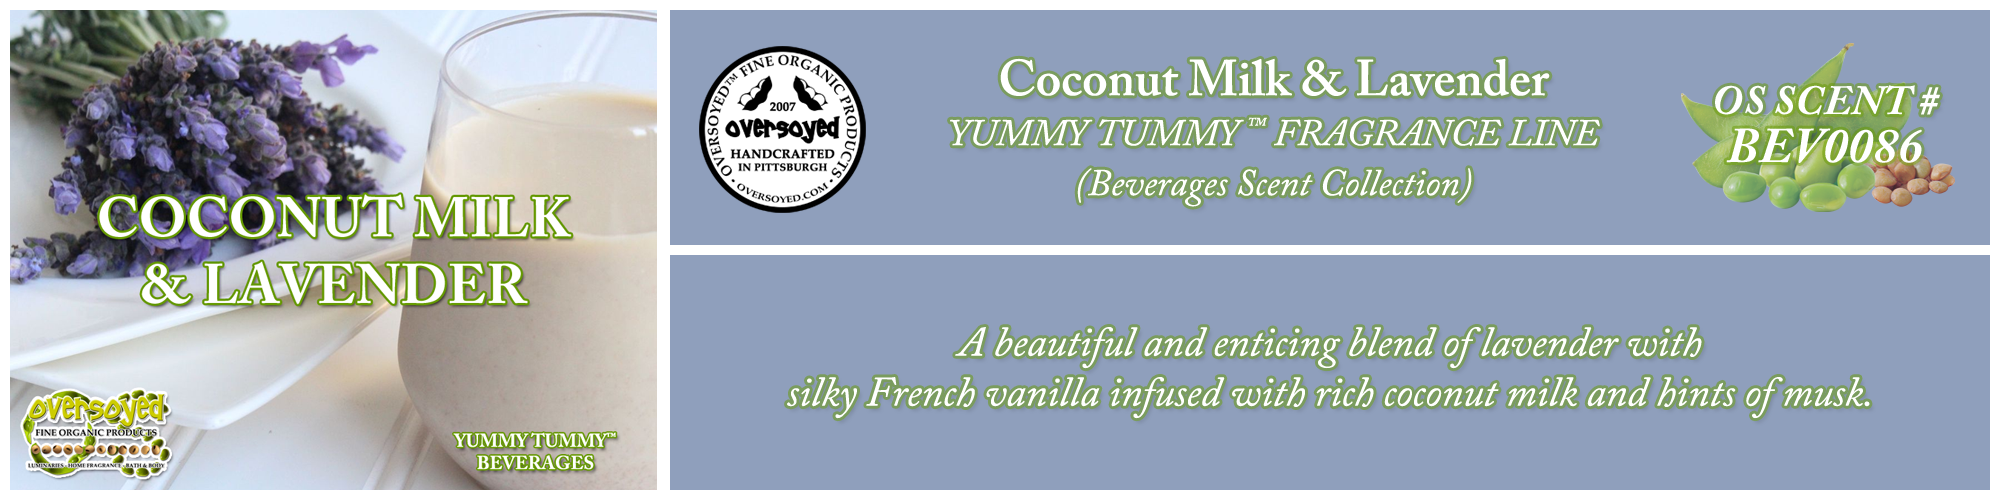 Coconut Milk & Lavender Handcrafted Products Collection